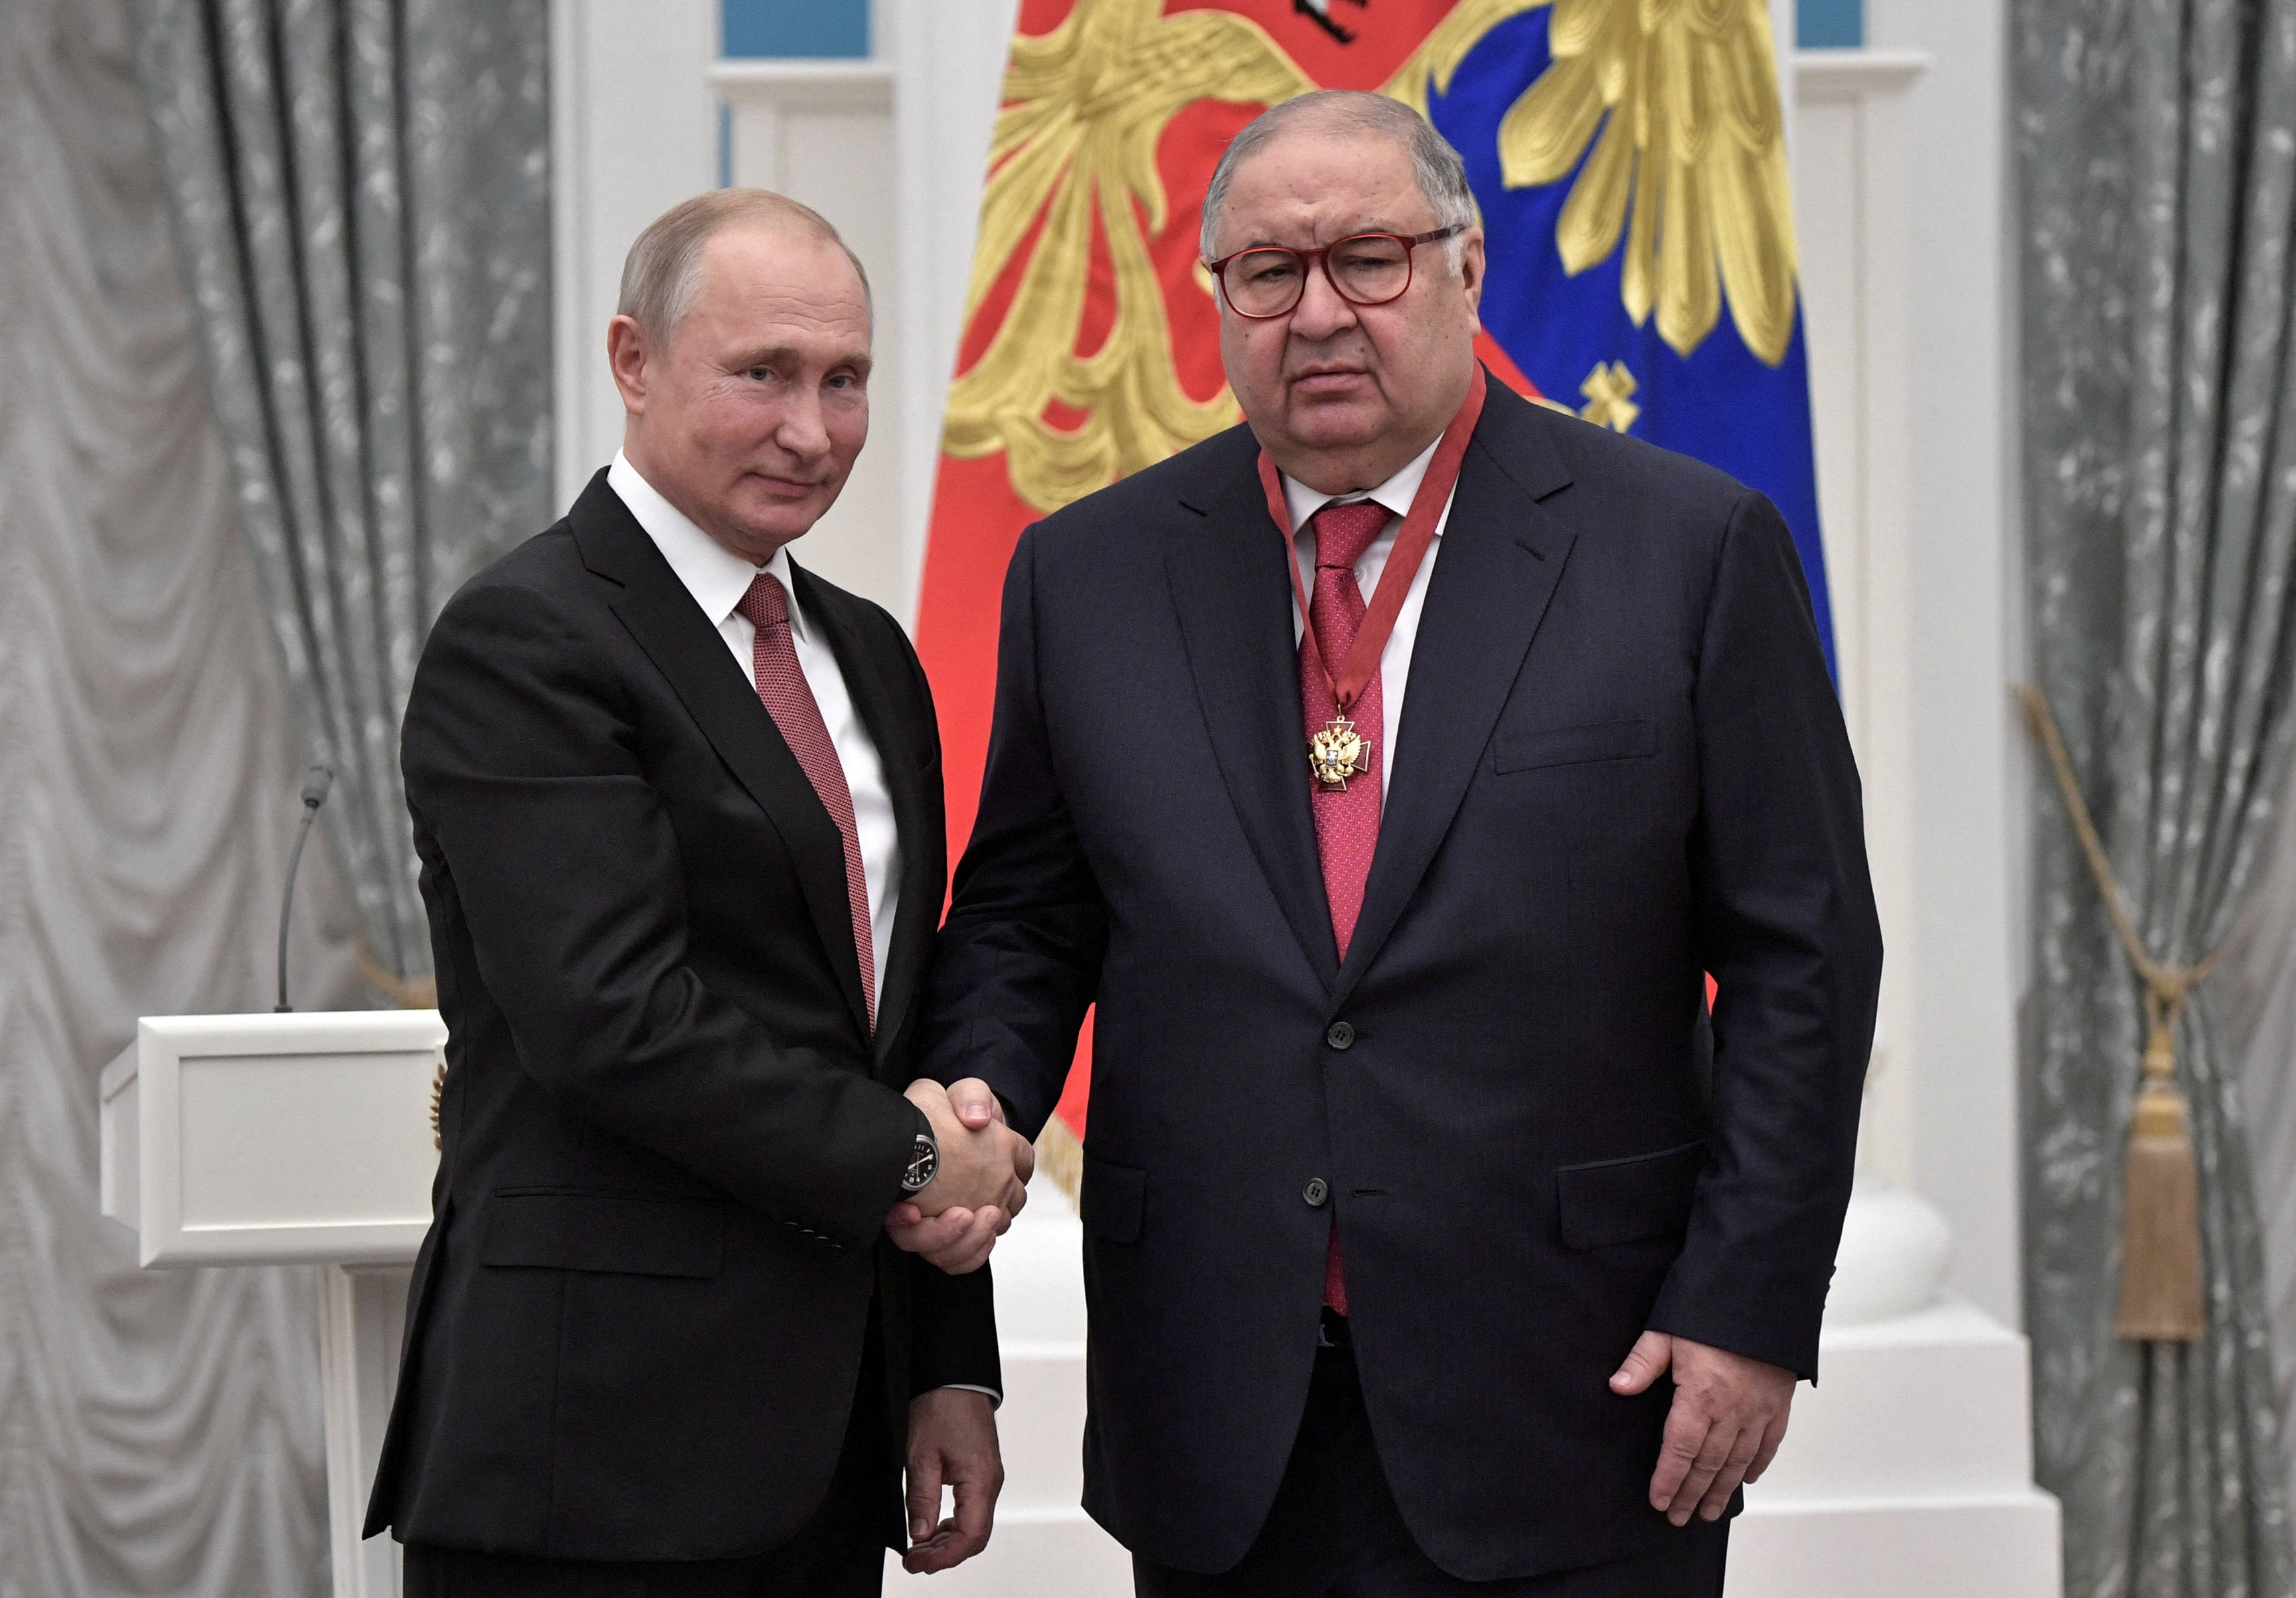 Russian President Putin and Russian businessman Usmanov attend an awarding ceremony in Moscow